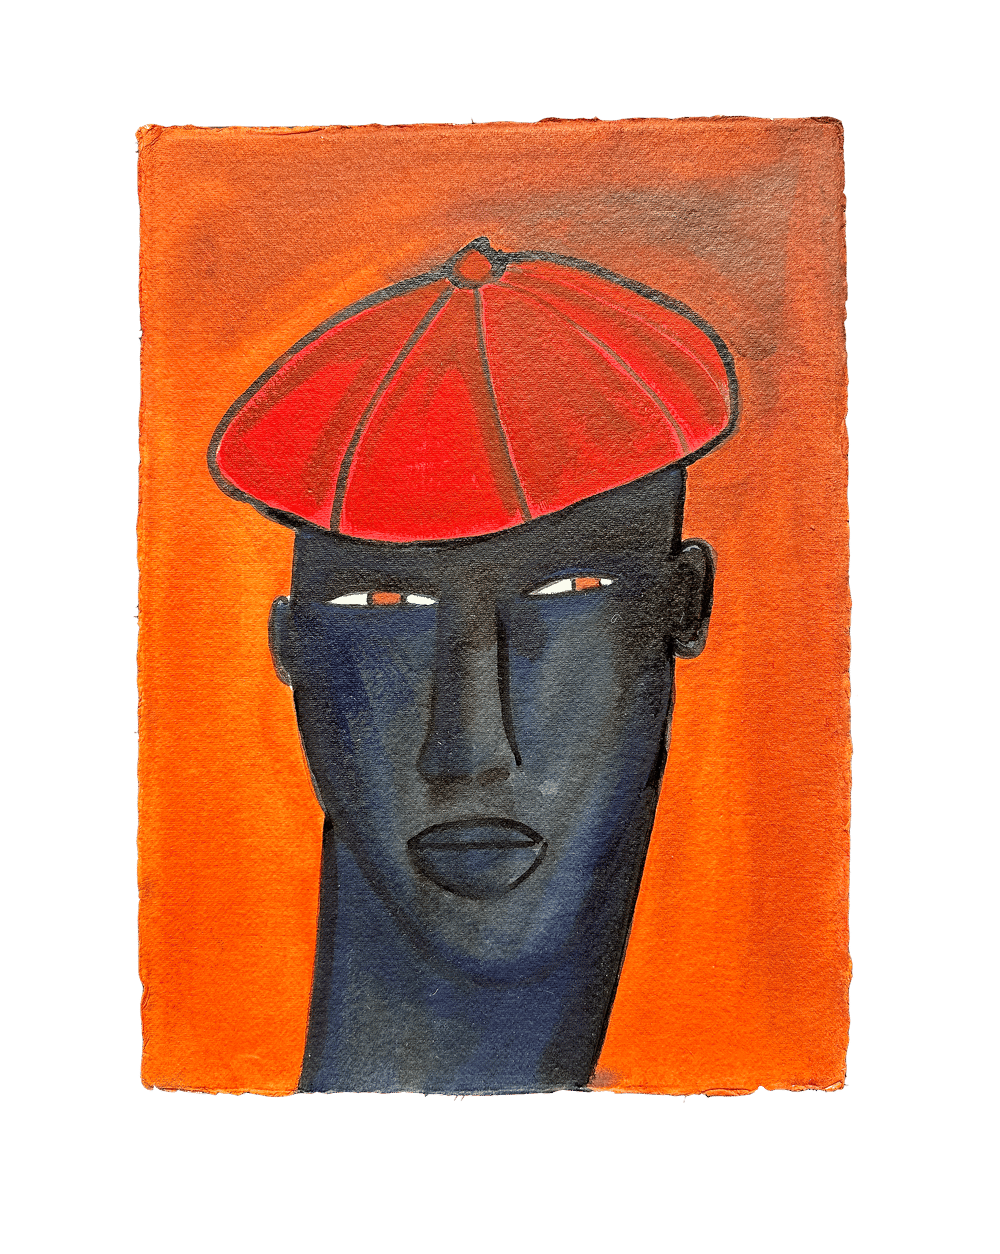 Image of  'MAN IN THE RED FLAT HAT' by STEPHEN ANTHONY